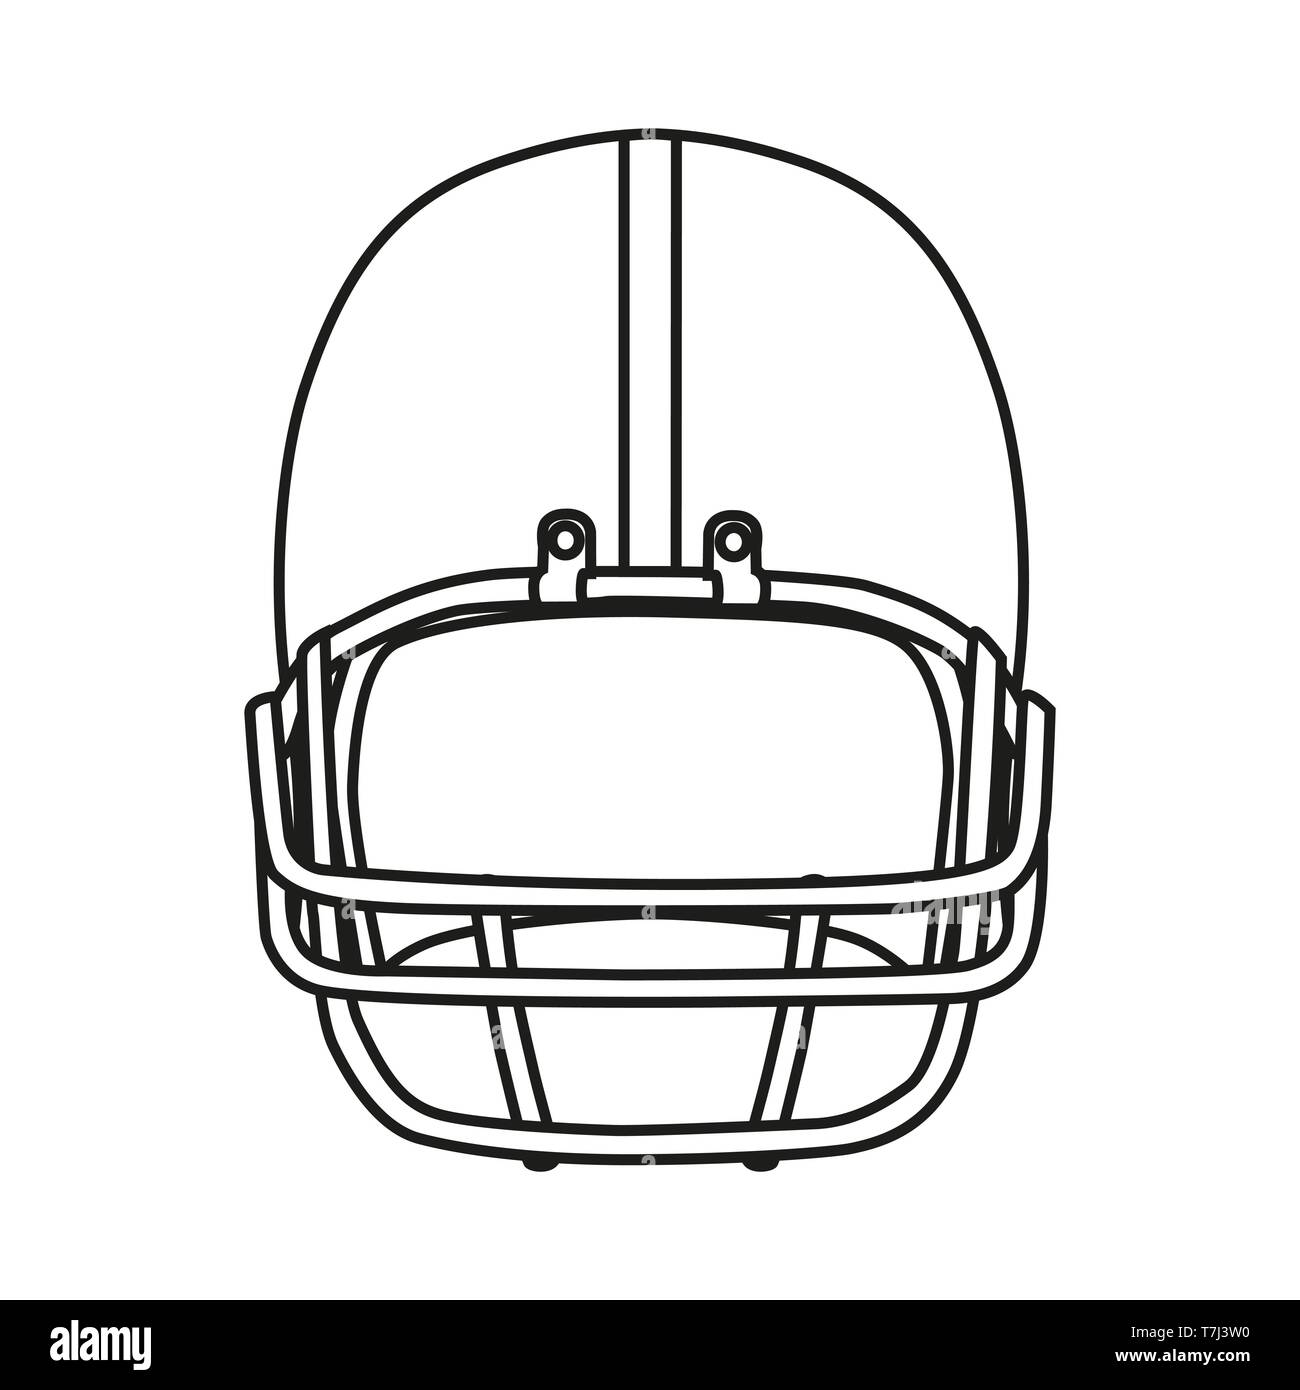 Football helmet line icon isolated on white background outline thin game uniform silhouette vector stock vector image art